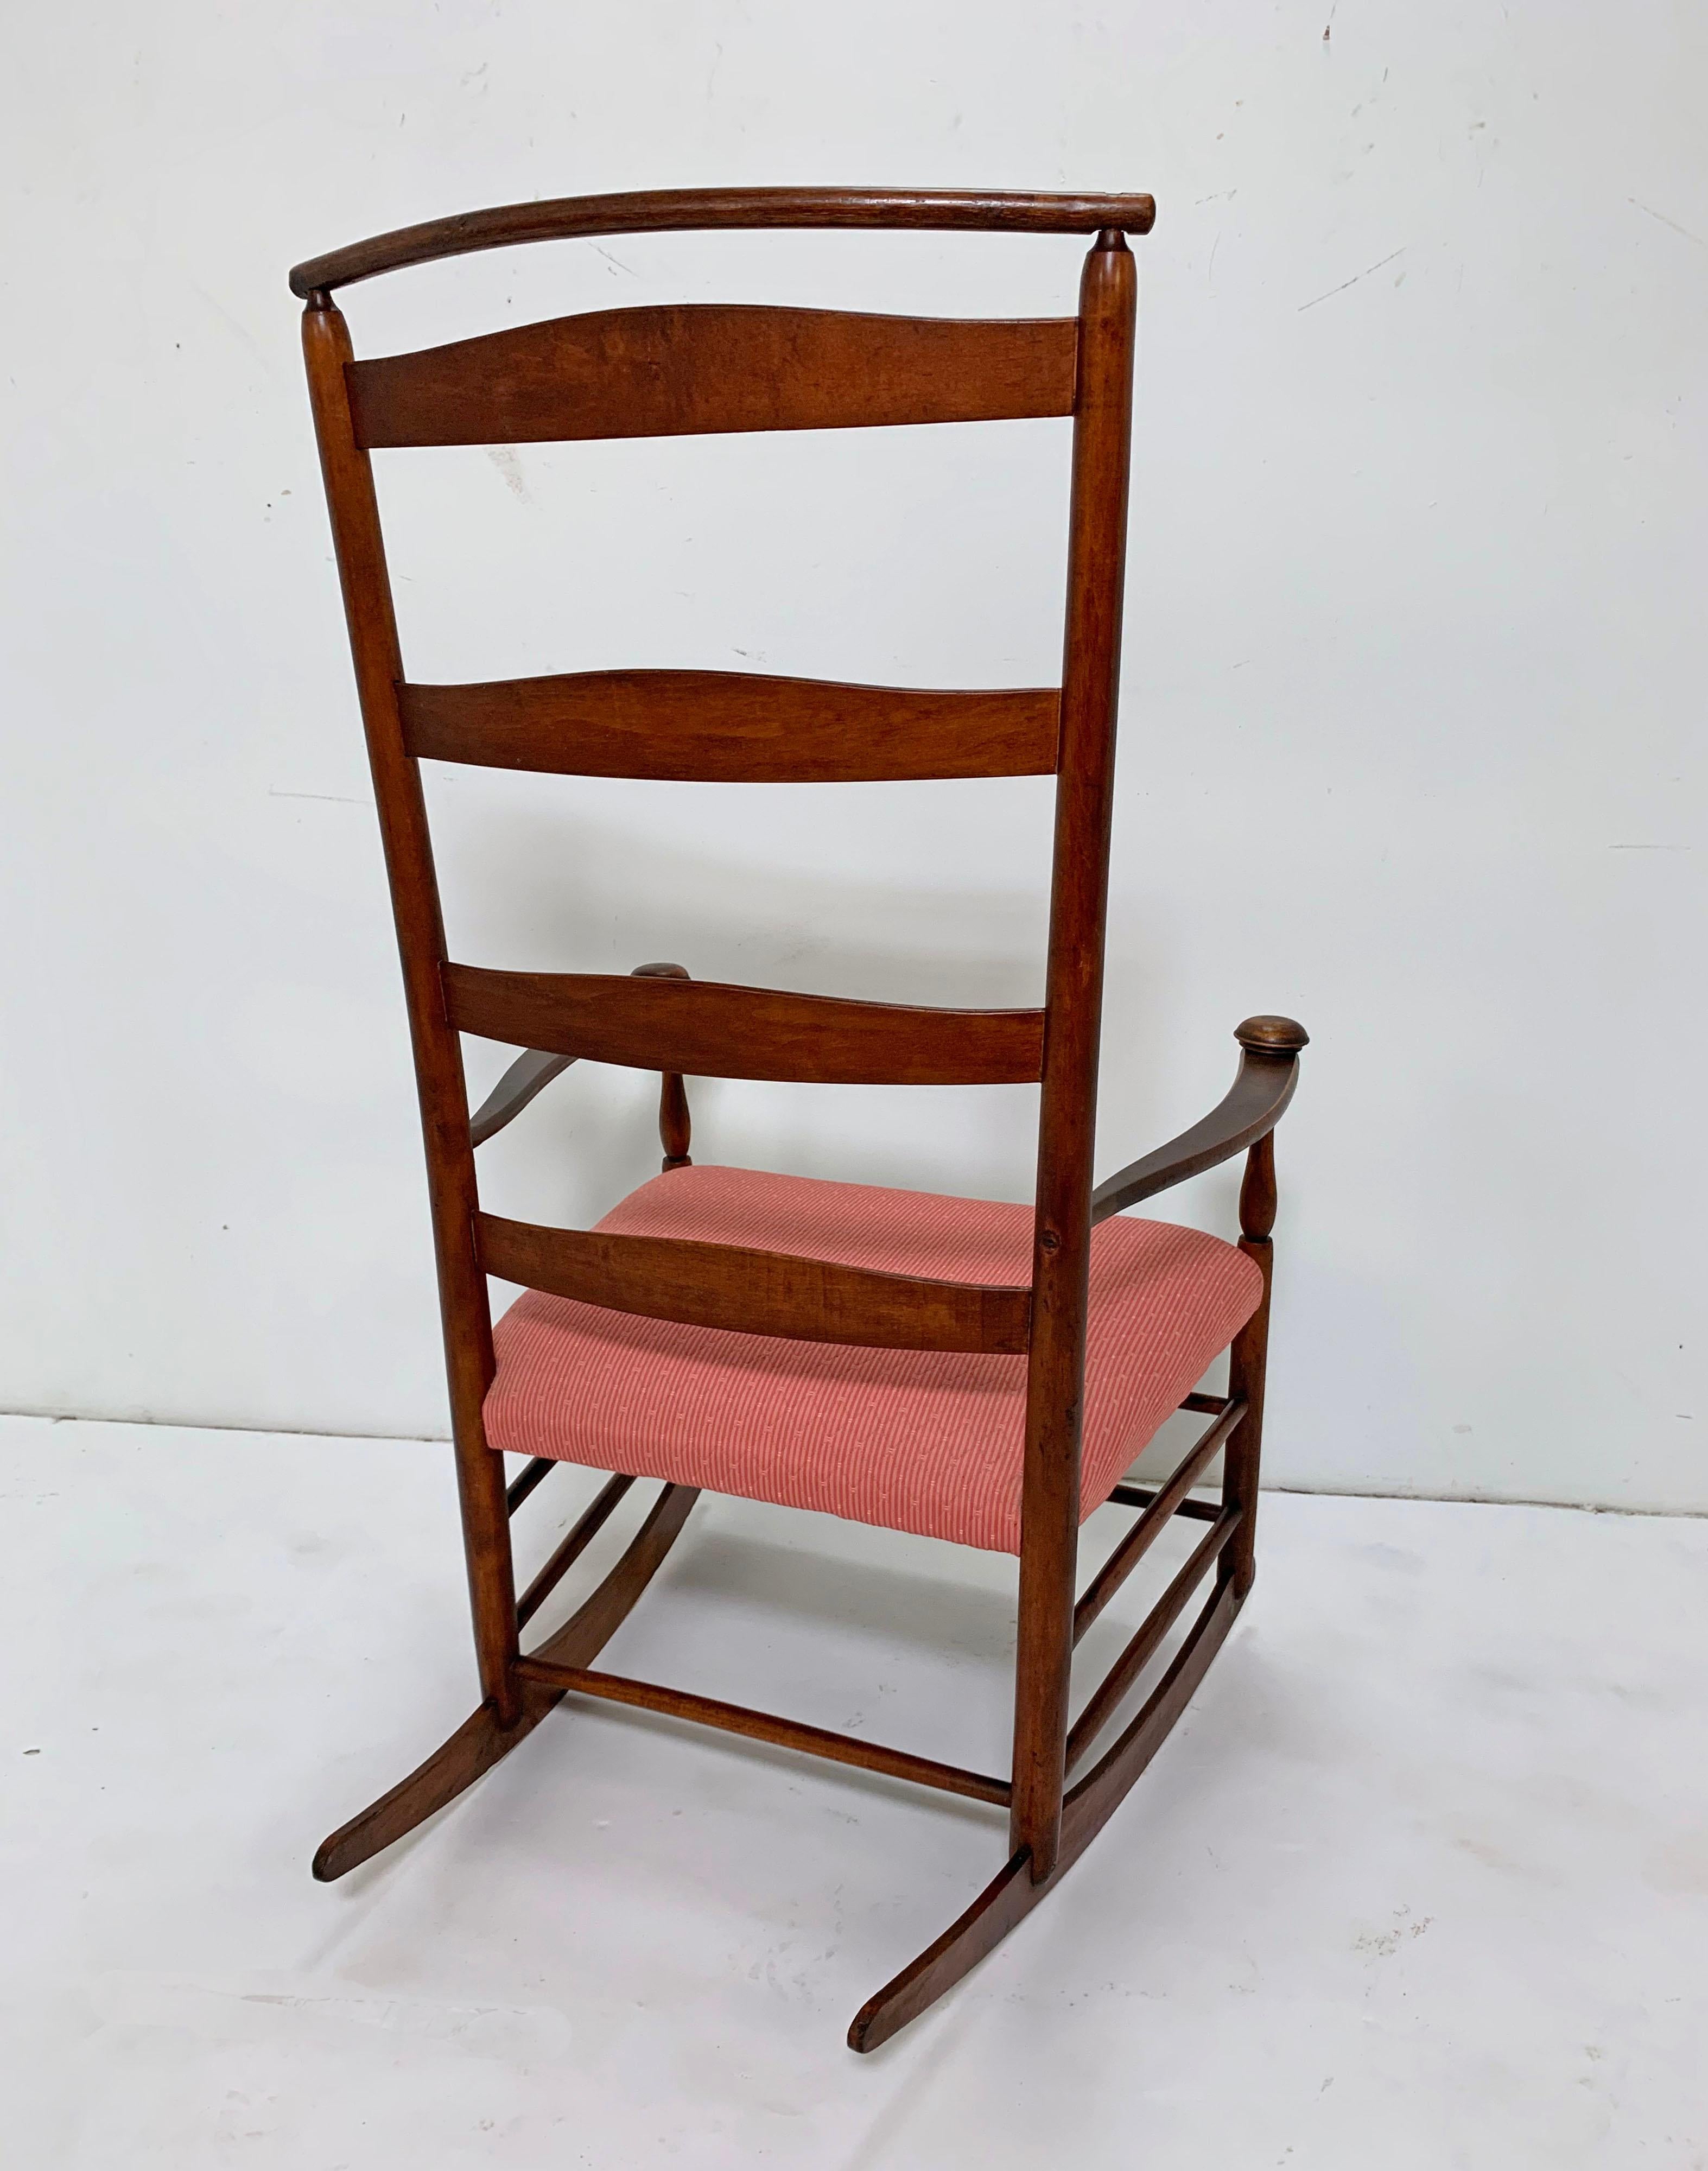 Upholstery Antique 19th Century Shaker No. 7 Rocking Chair with Shawl Bar